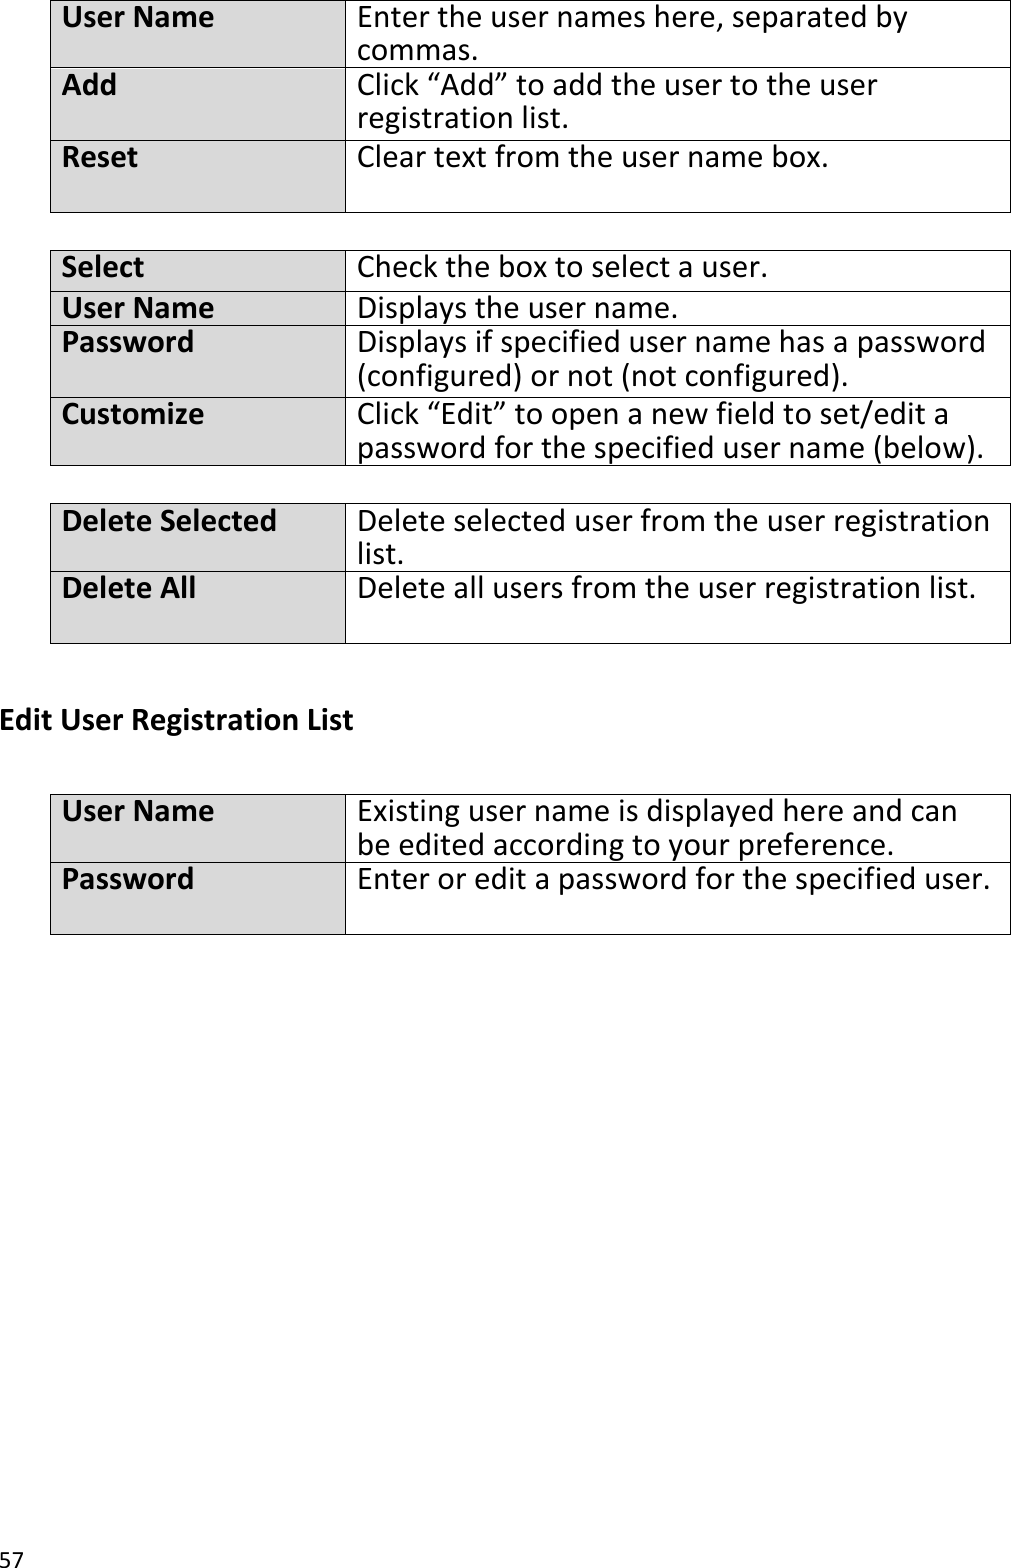 57  User Name Enter the user names here, separated by commas. Add Click “Add” to add the user to the user registration list. Reset Clear text from the user name box.  Select Check the box to select a user. User Name Displays the user name. Password Displays if specified user name has a password (configured) or not (not configured). Customize Click “Edit” to open a new field to set/edit a password for the specified user name (below).  Delete Selected Delete selected user from the user registration list. Delete All Delete all users from the user registration list.  Edit User Registration List  User Name Existing user name is displayed here and can be edited according to your preference. Password Enter or edit a password for the specified user.   